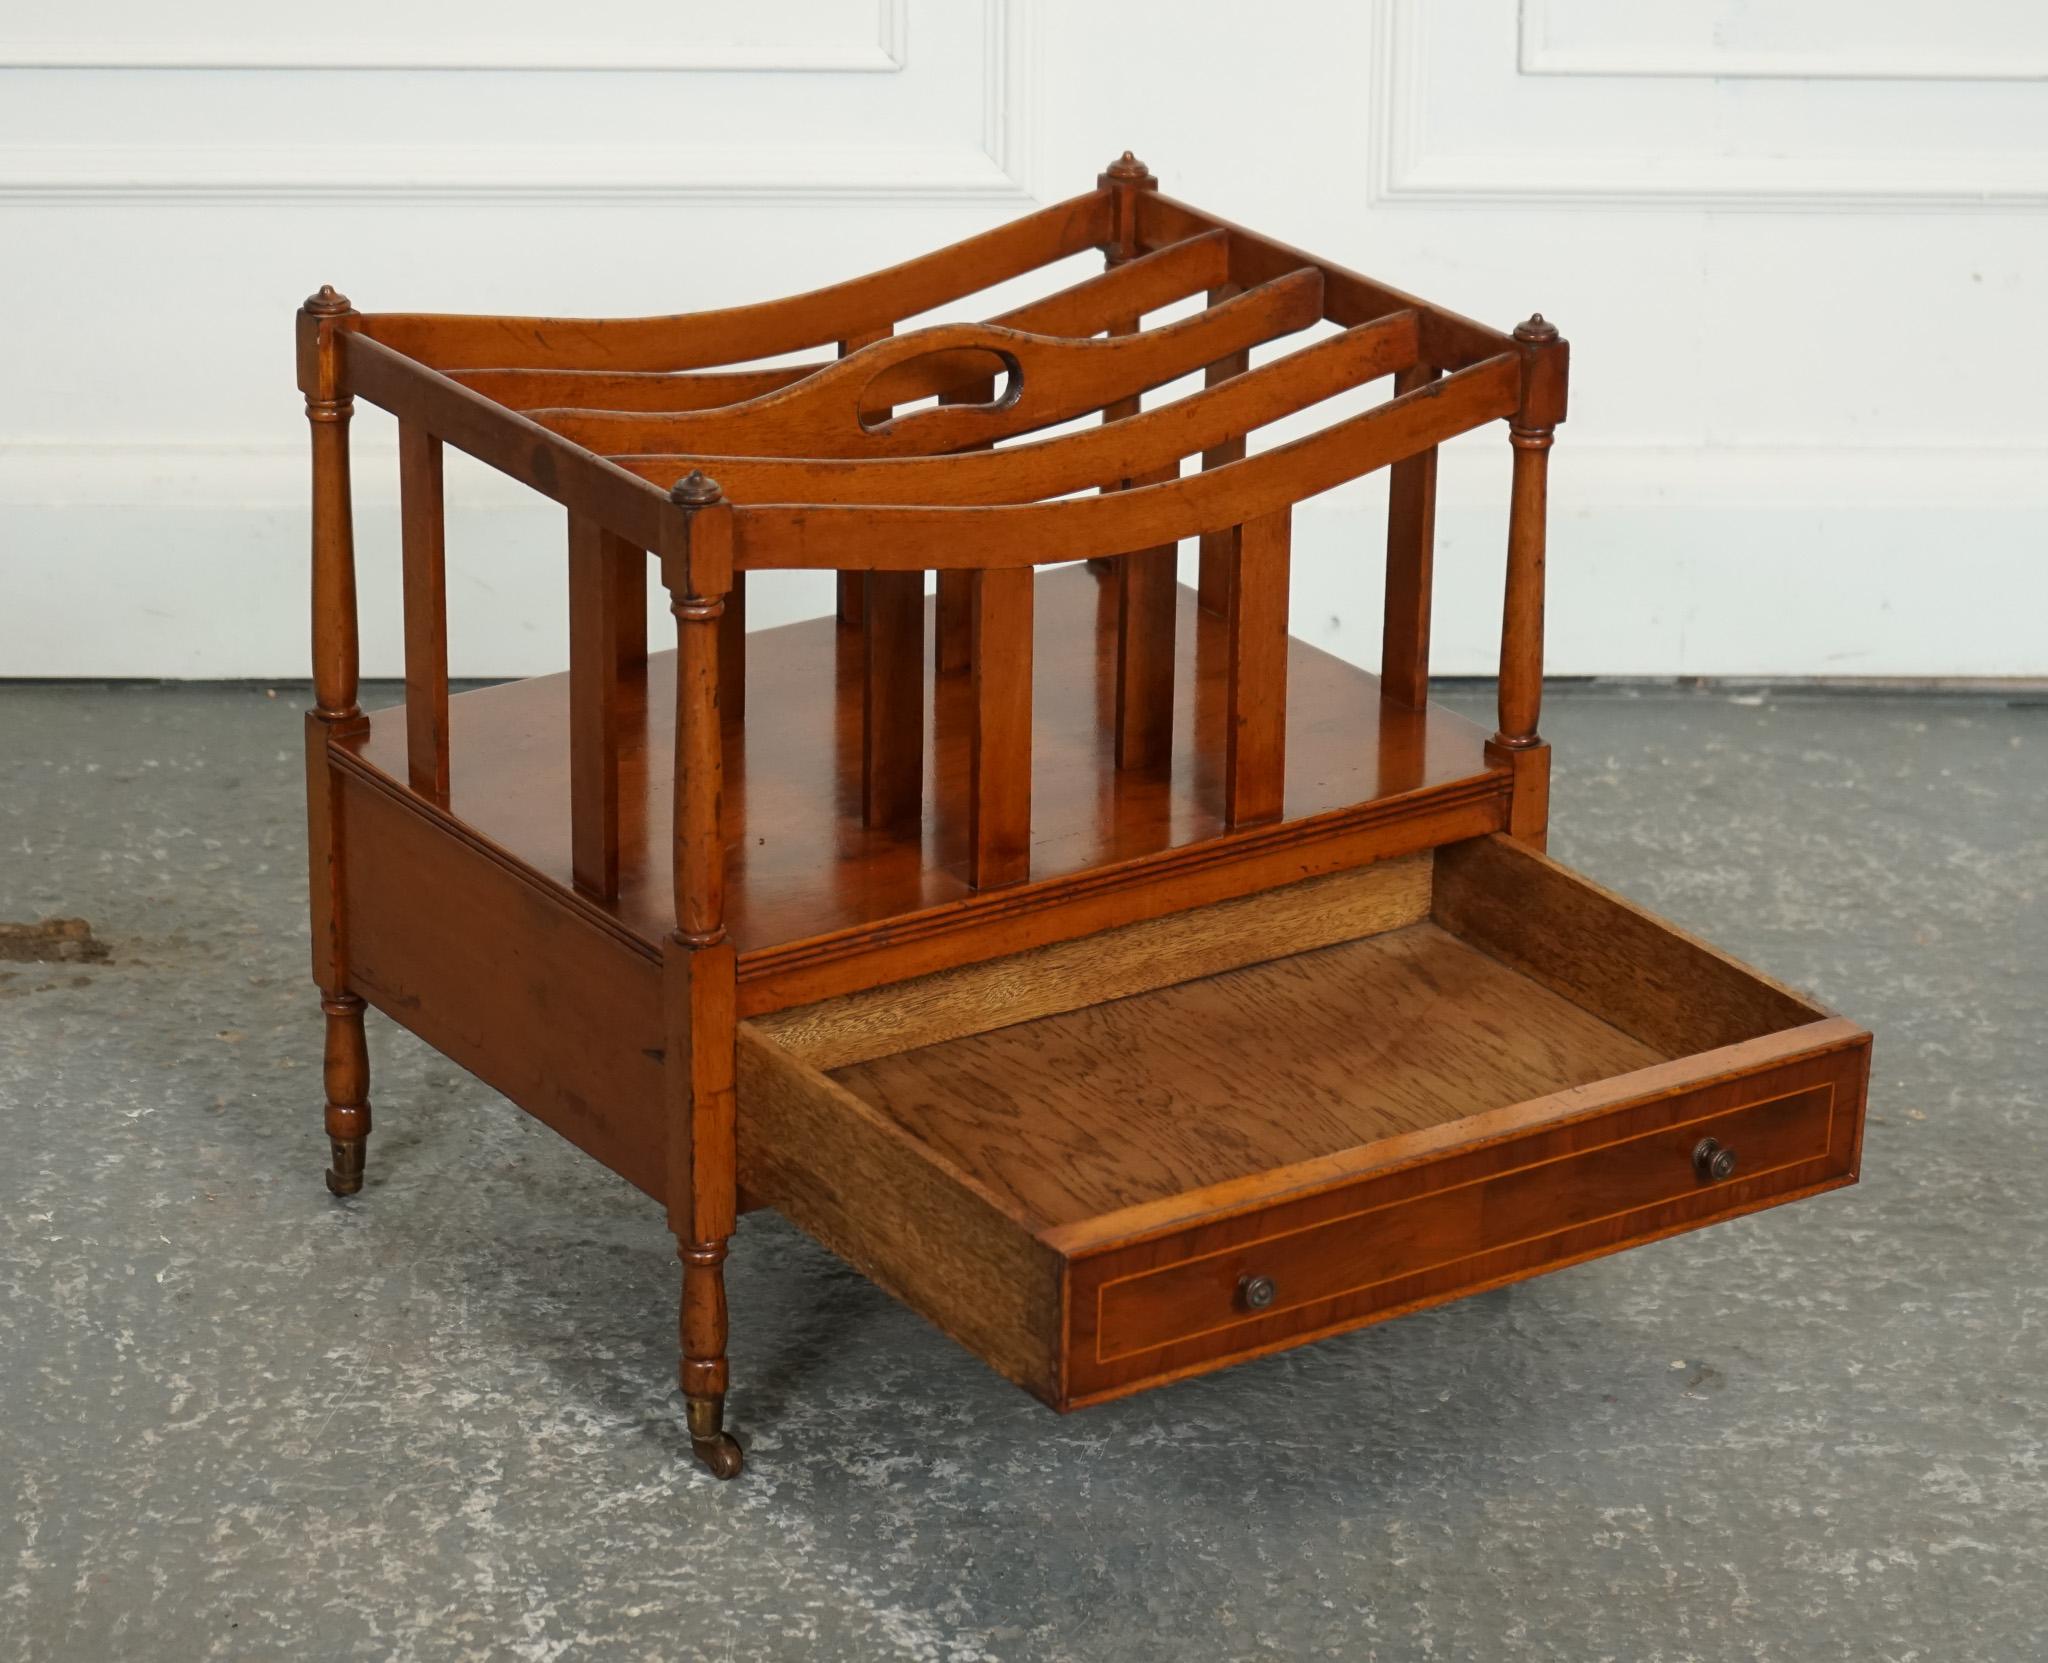 

We are delighted to offer for sale this Vintage Walnut Wood Magazine Rack.

A vintage walnut Canterbury newspaper rack with brass handles is a charming and elegant piece of furniture that exudes a sense of nostalgia and sophistication. This type